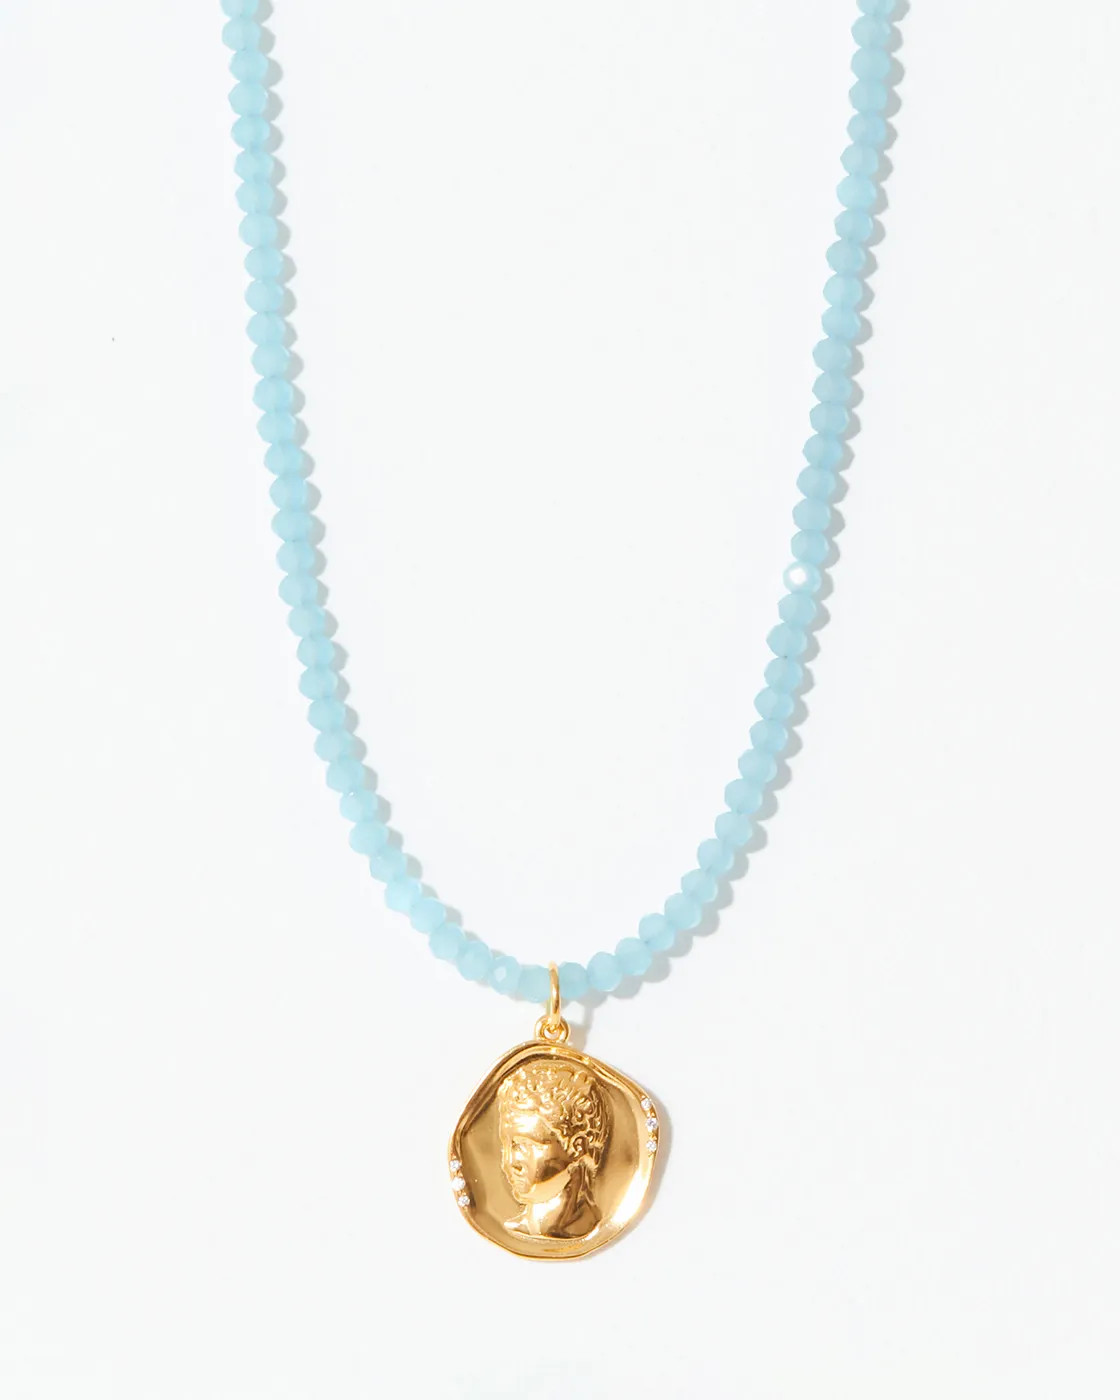 Hermes Pendant on a Blue Crystal Necklace